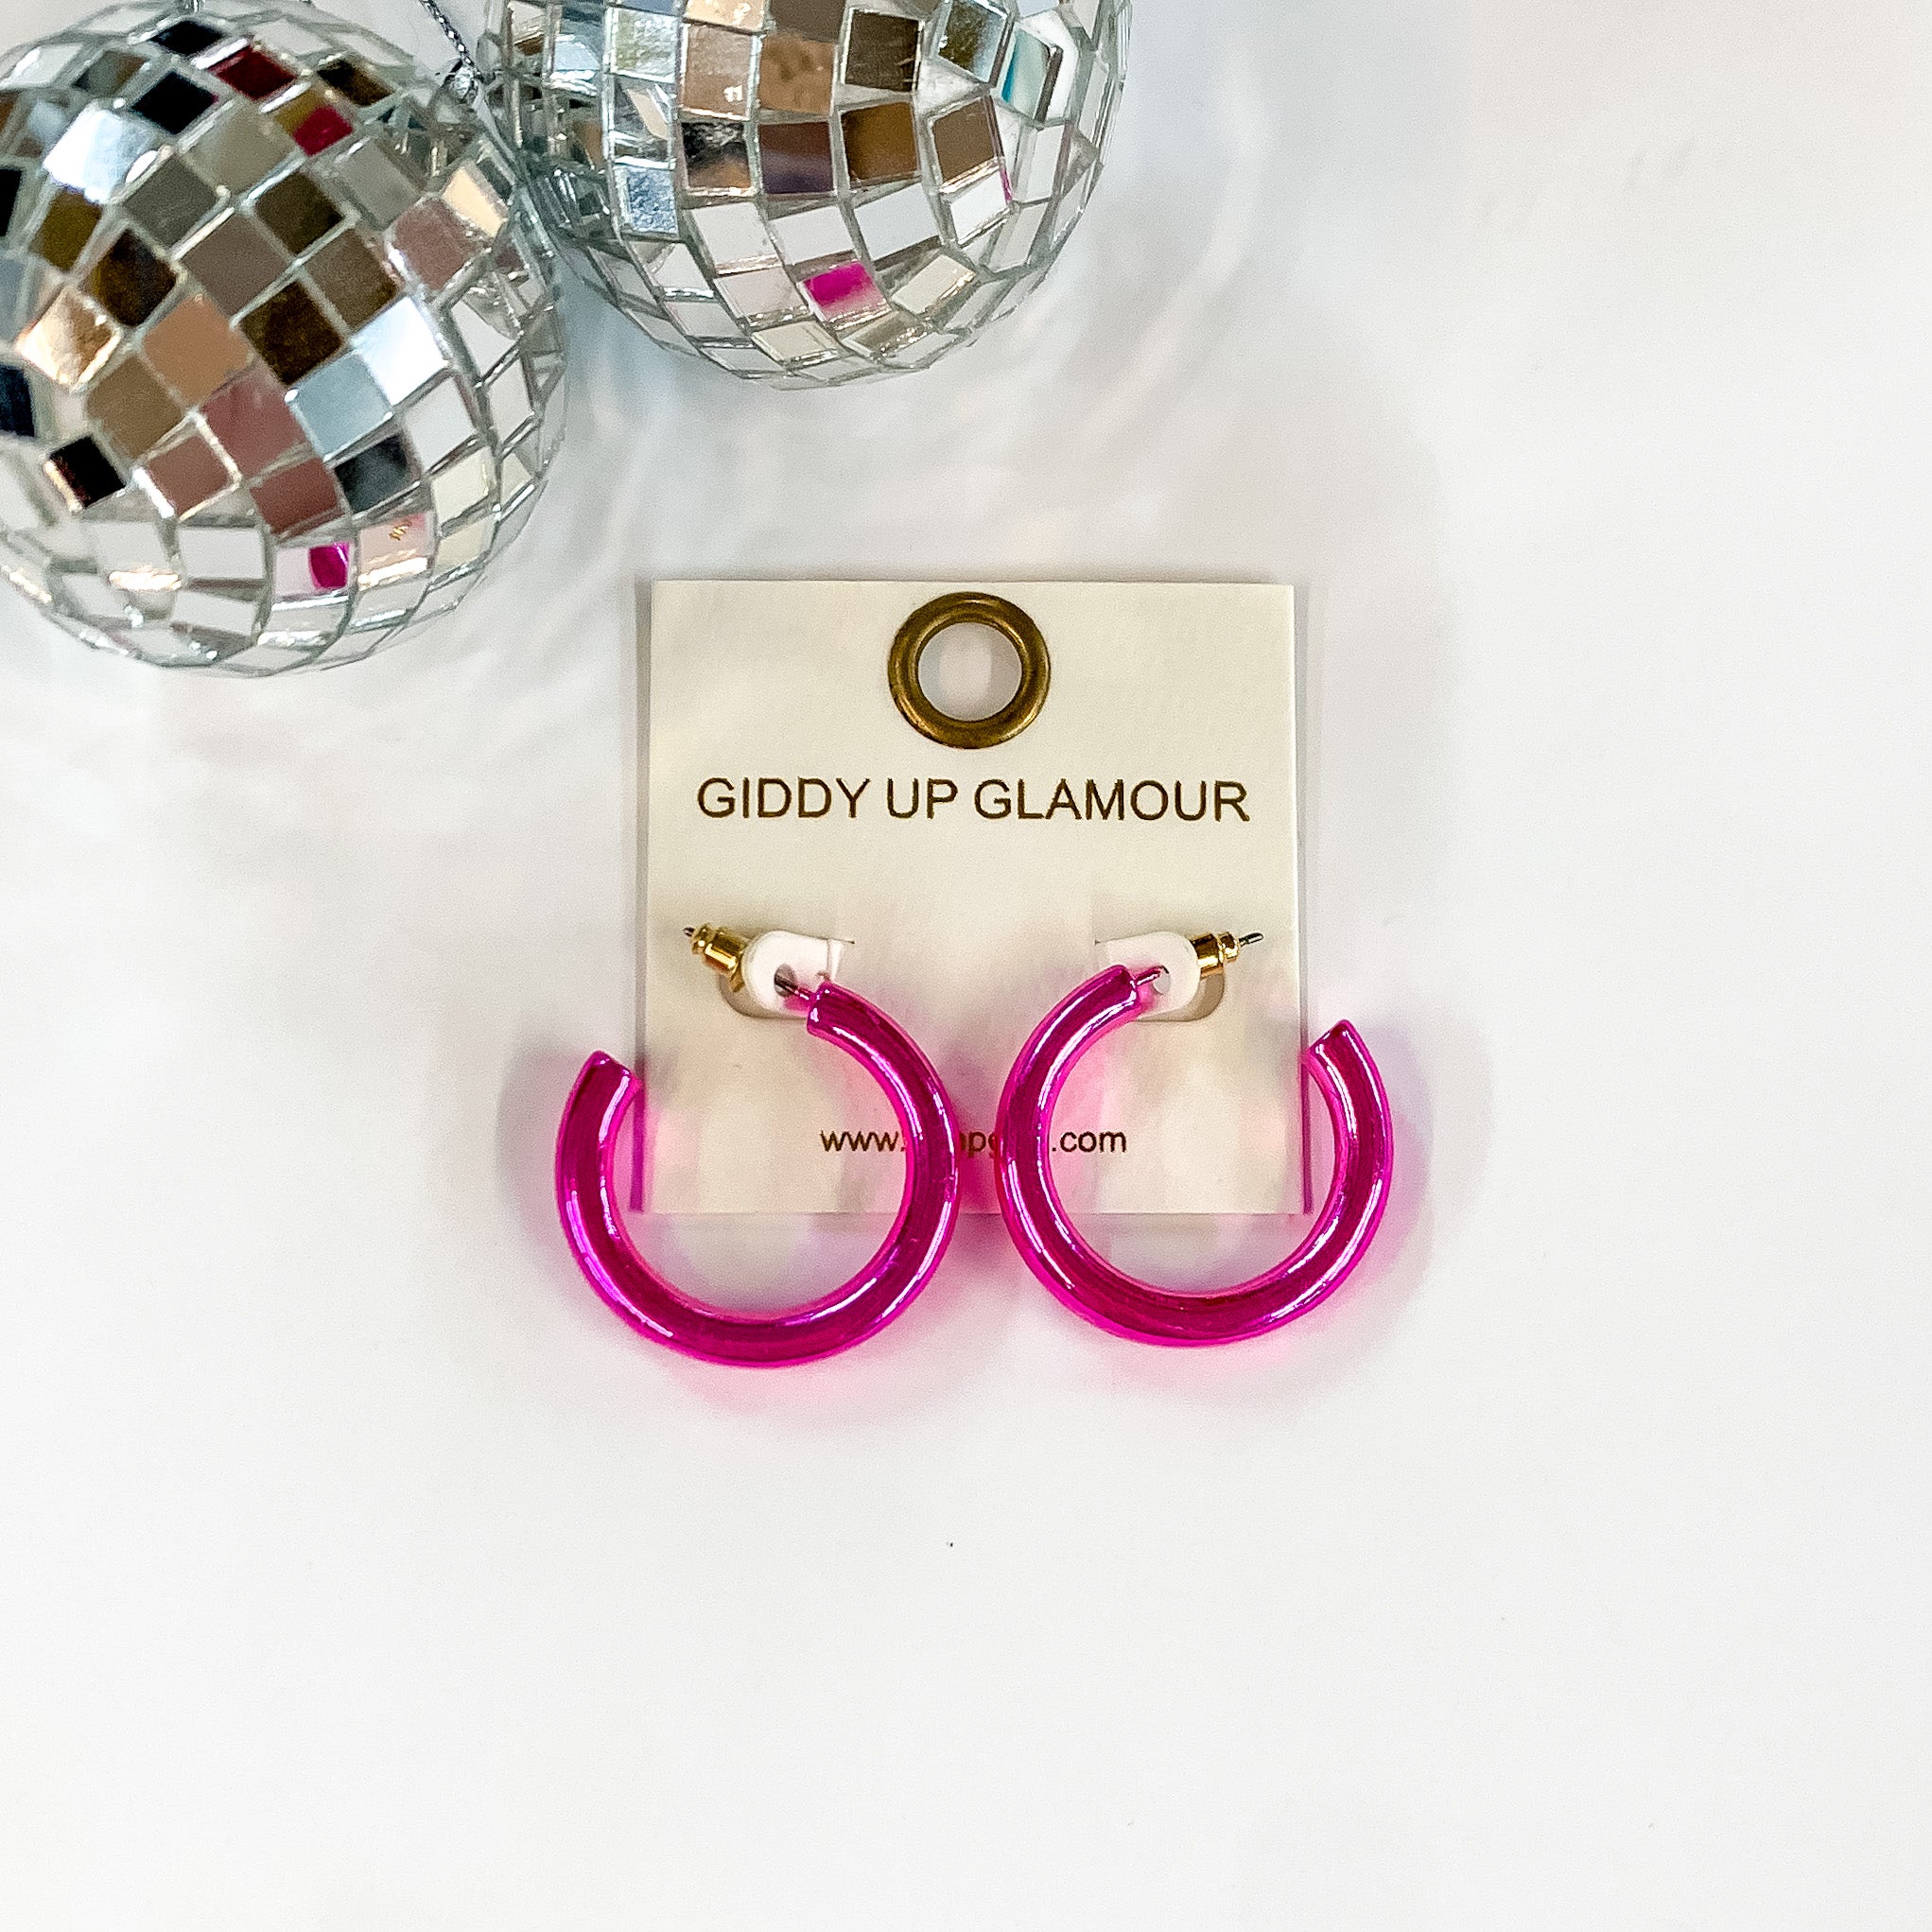 Light up Small Neon Hoop Earrings in Hot Pink. Pictured on a white background with disco balls in the top left corner.